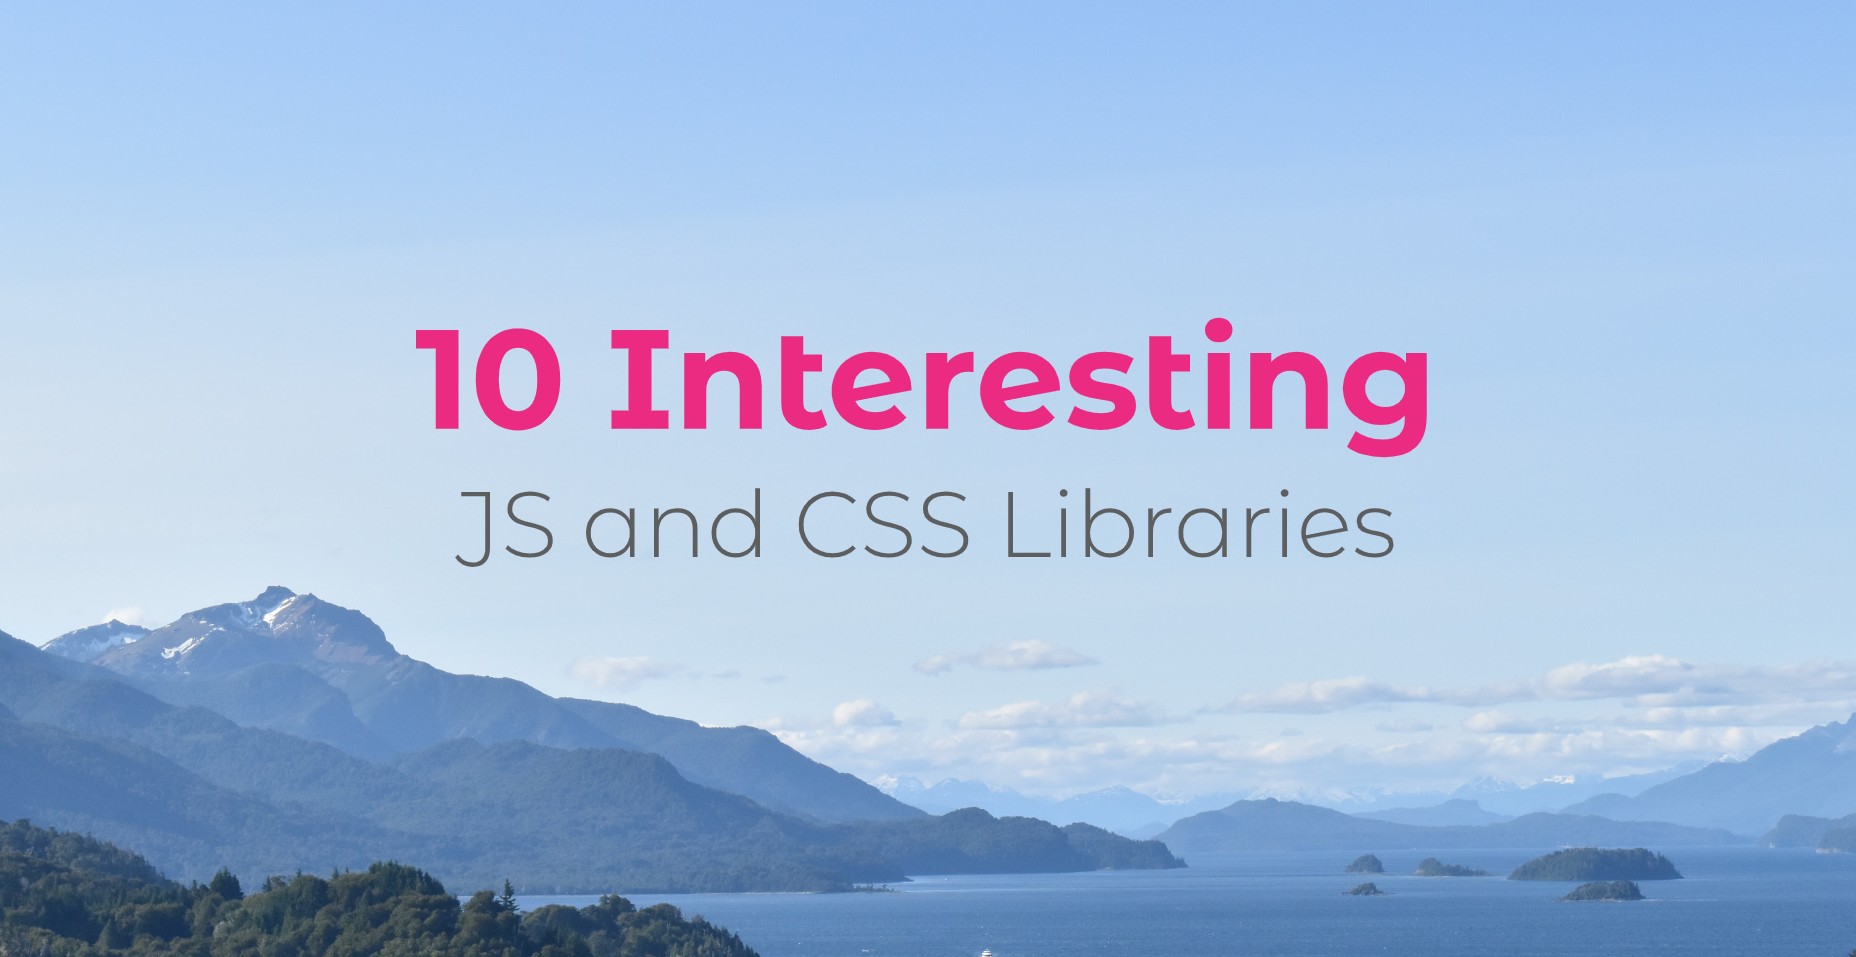 10 Interesting JavaScript and CSS Libraries for April 2020